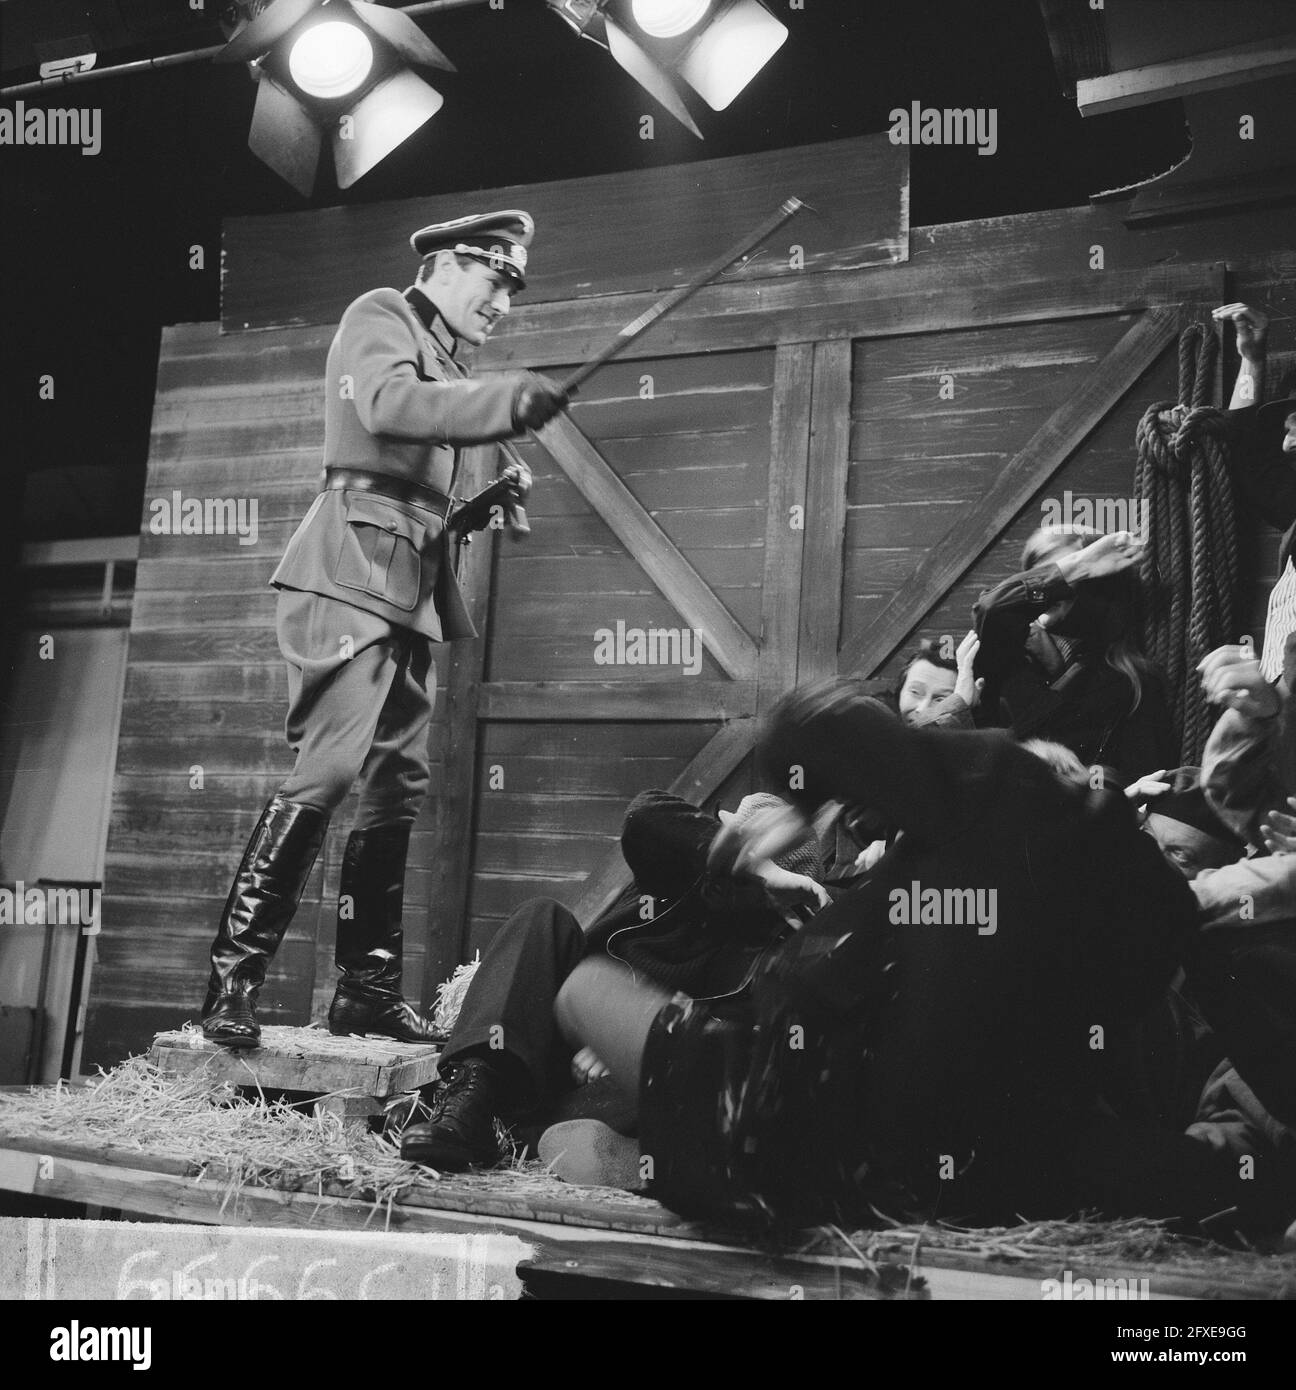 Television play Wonder aan de Donau revue KRO, Tom van Beek March 25  broadcast, January 27, 1964, Television plays, revues, broadcasts, The  Netherlands, 20th century press agency photo, news to remember, documentary,